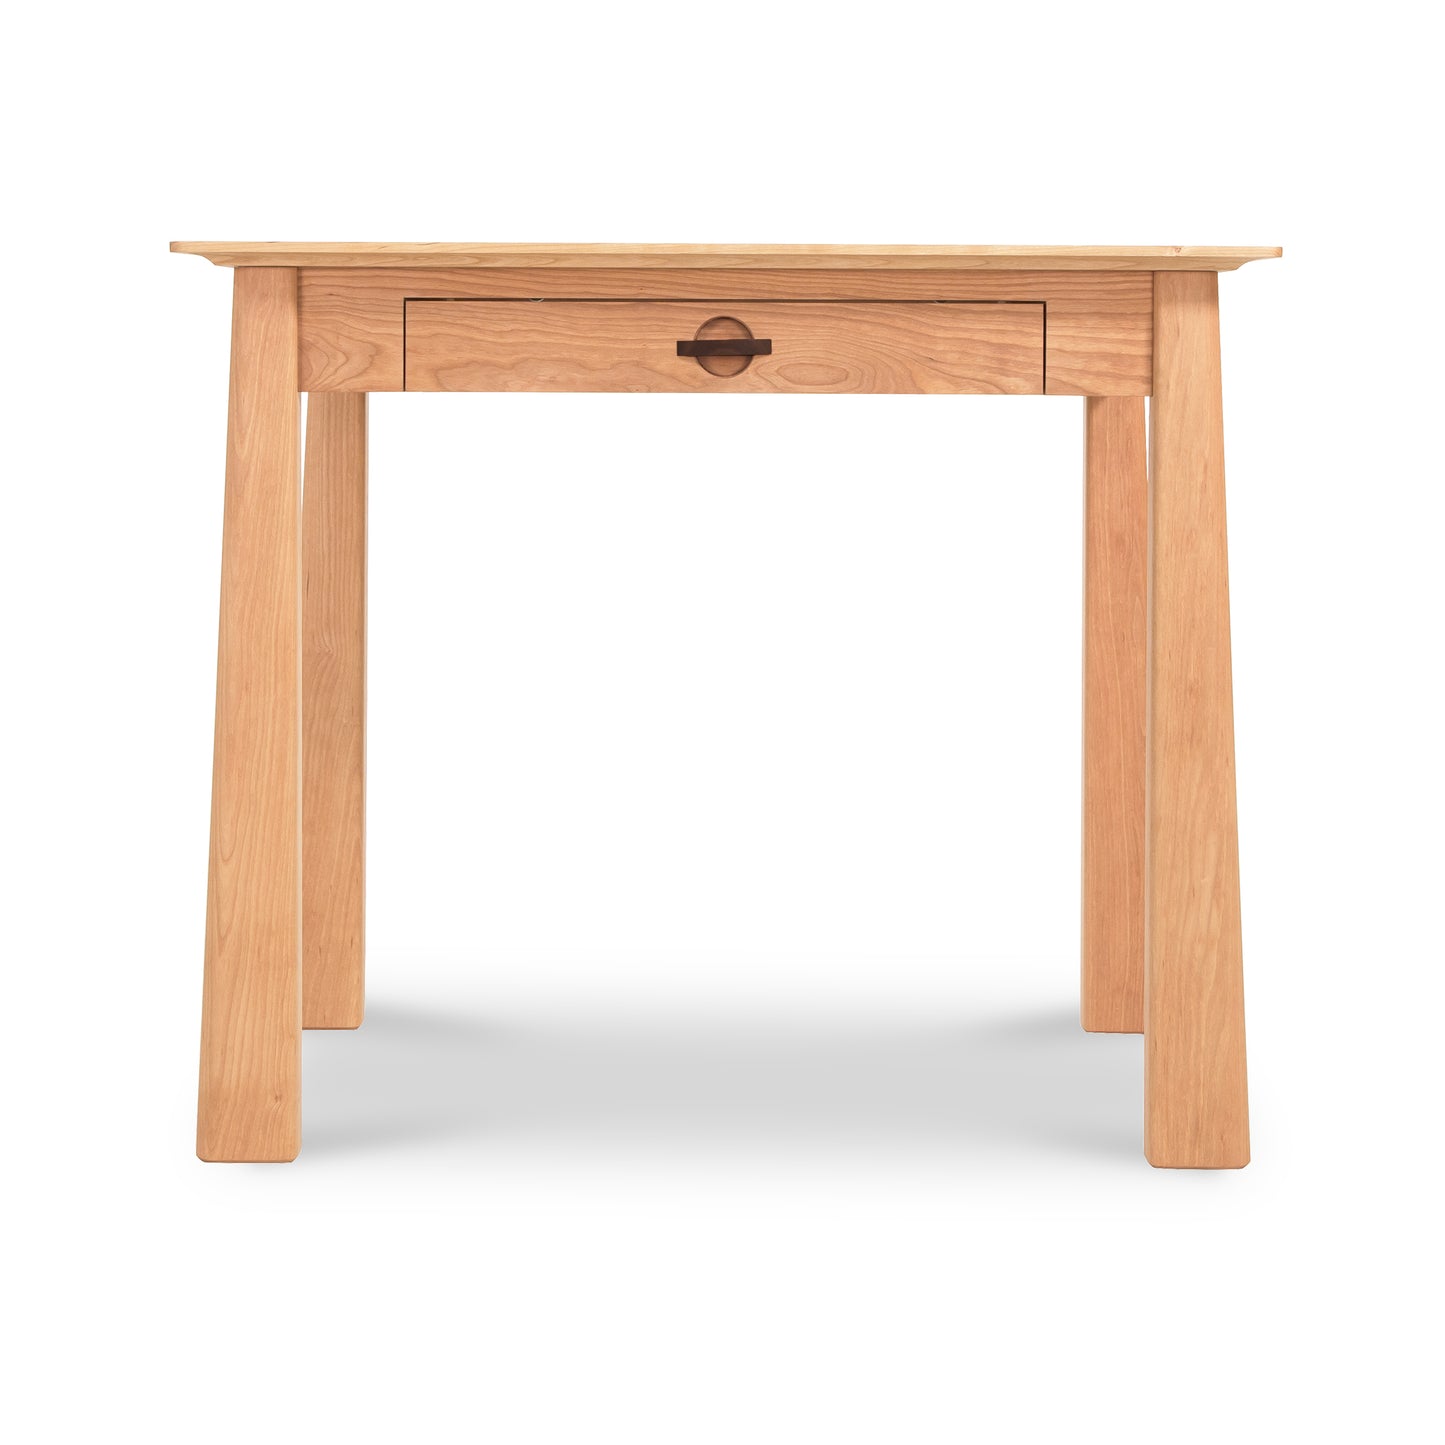 Eco-friendly Cherry Moon Writing Desk with a single central drawer by Maple Corner Woodworks, isolated on a white background.